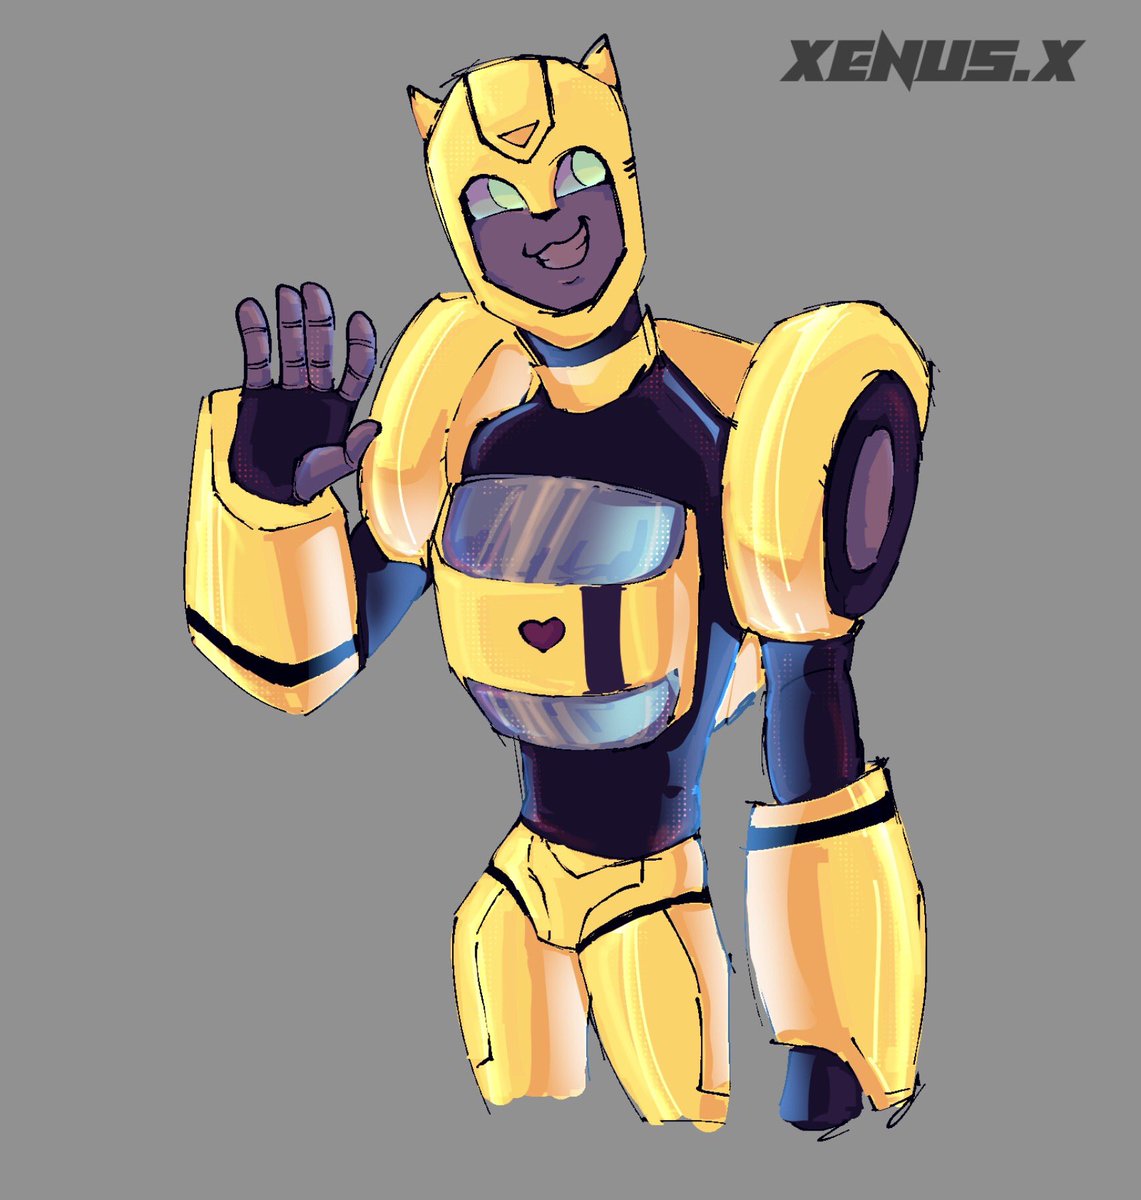 Im trying to figure out how to draw bumblebee

#Transformers #transformersanimated #bumblebee #bumblebeetfa #maccadams #Maccadam